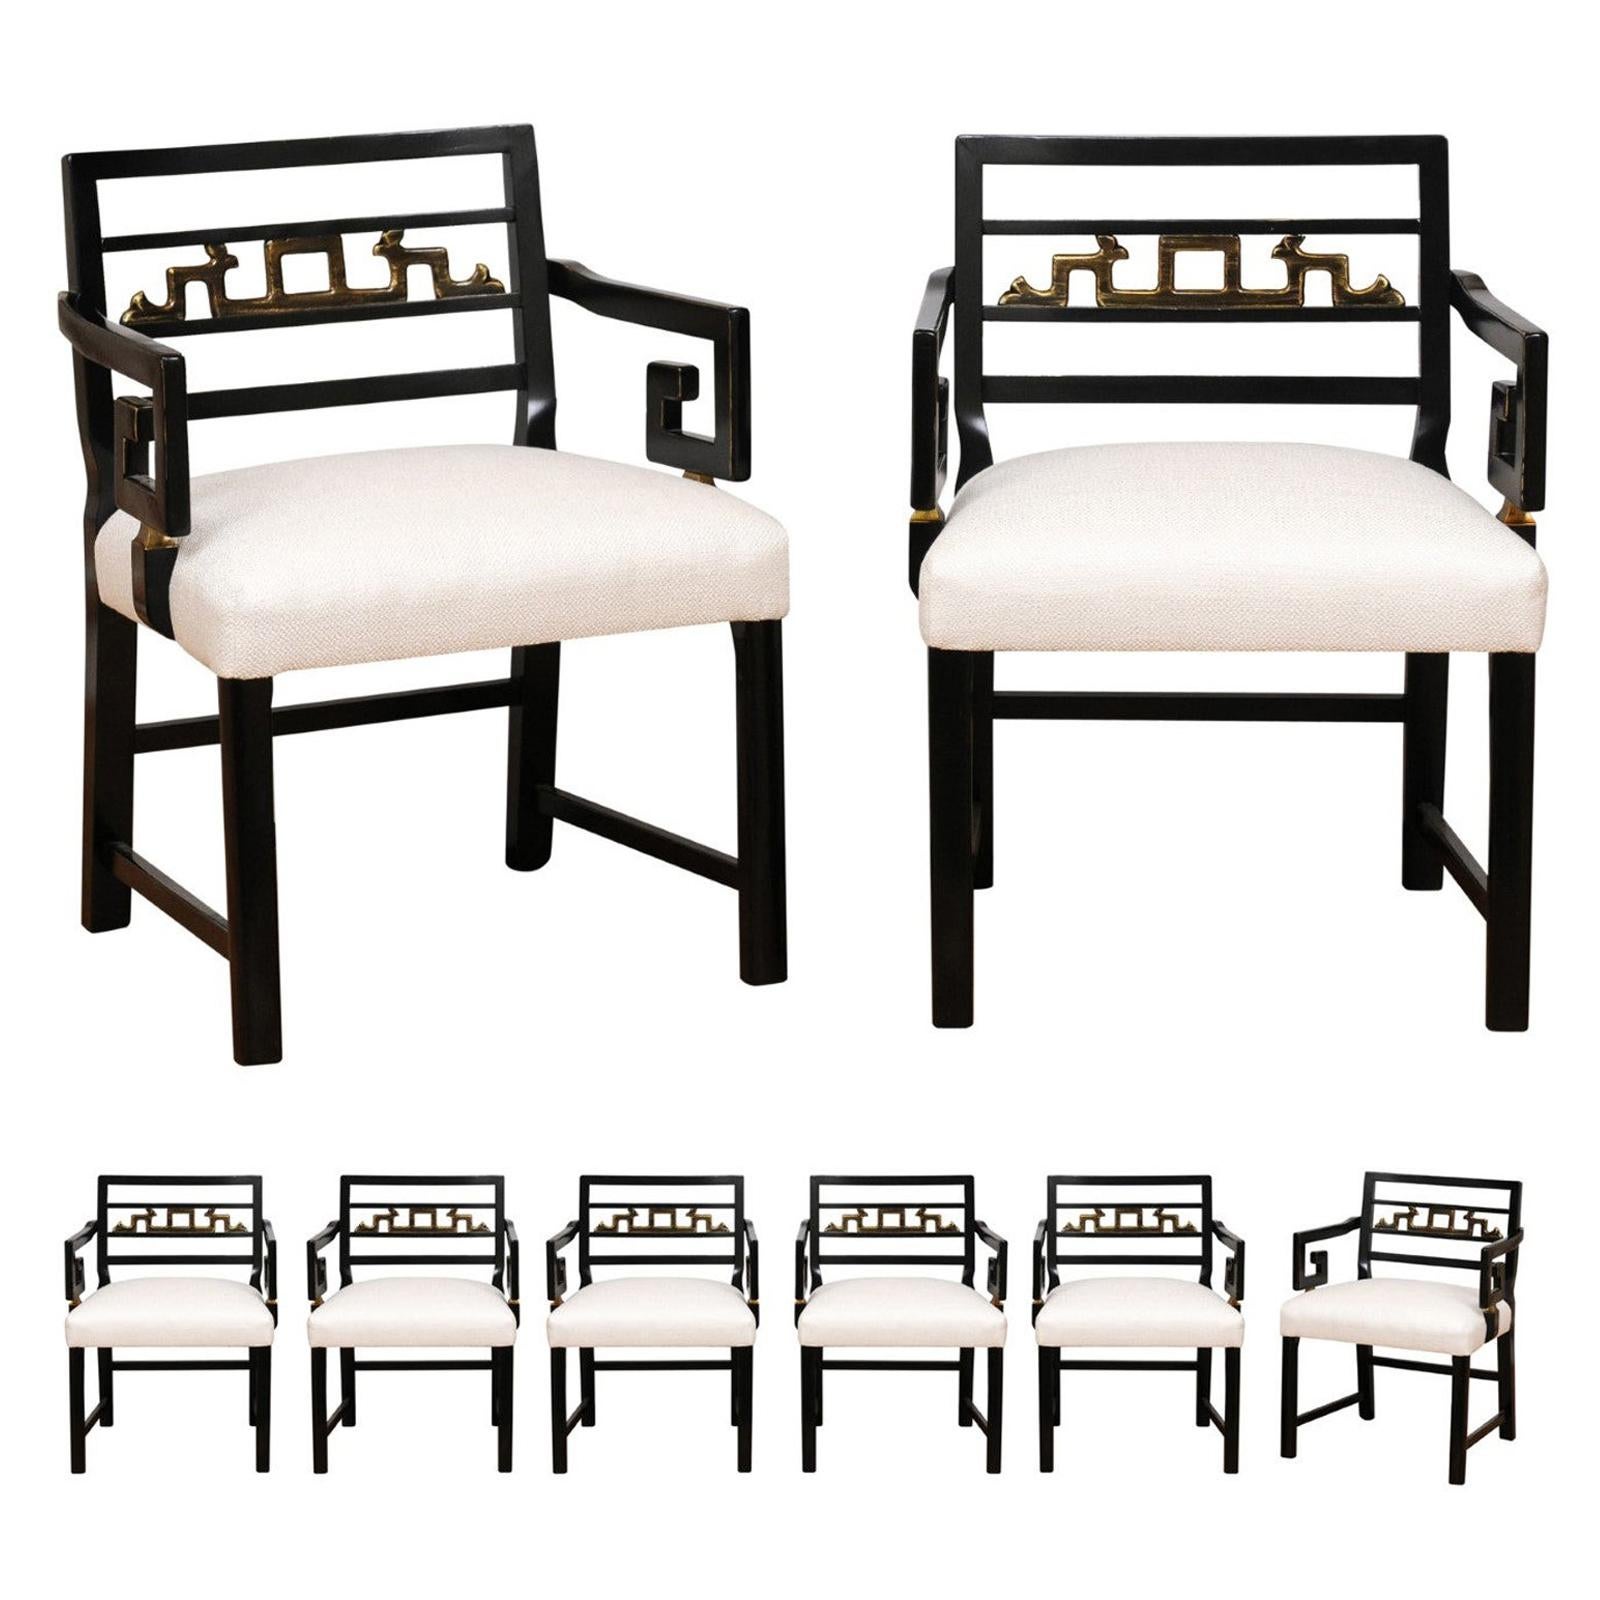 Exquisite Set of 8 Chinoiserie Greek Key Armchairs by Baker, circa 1960 For Sale